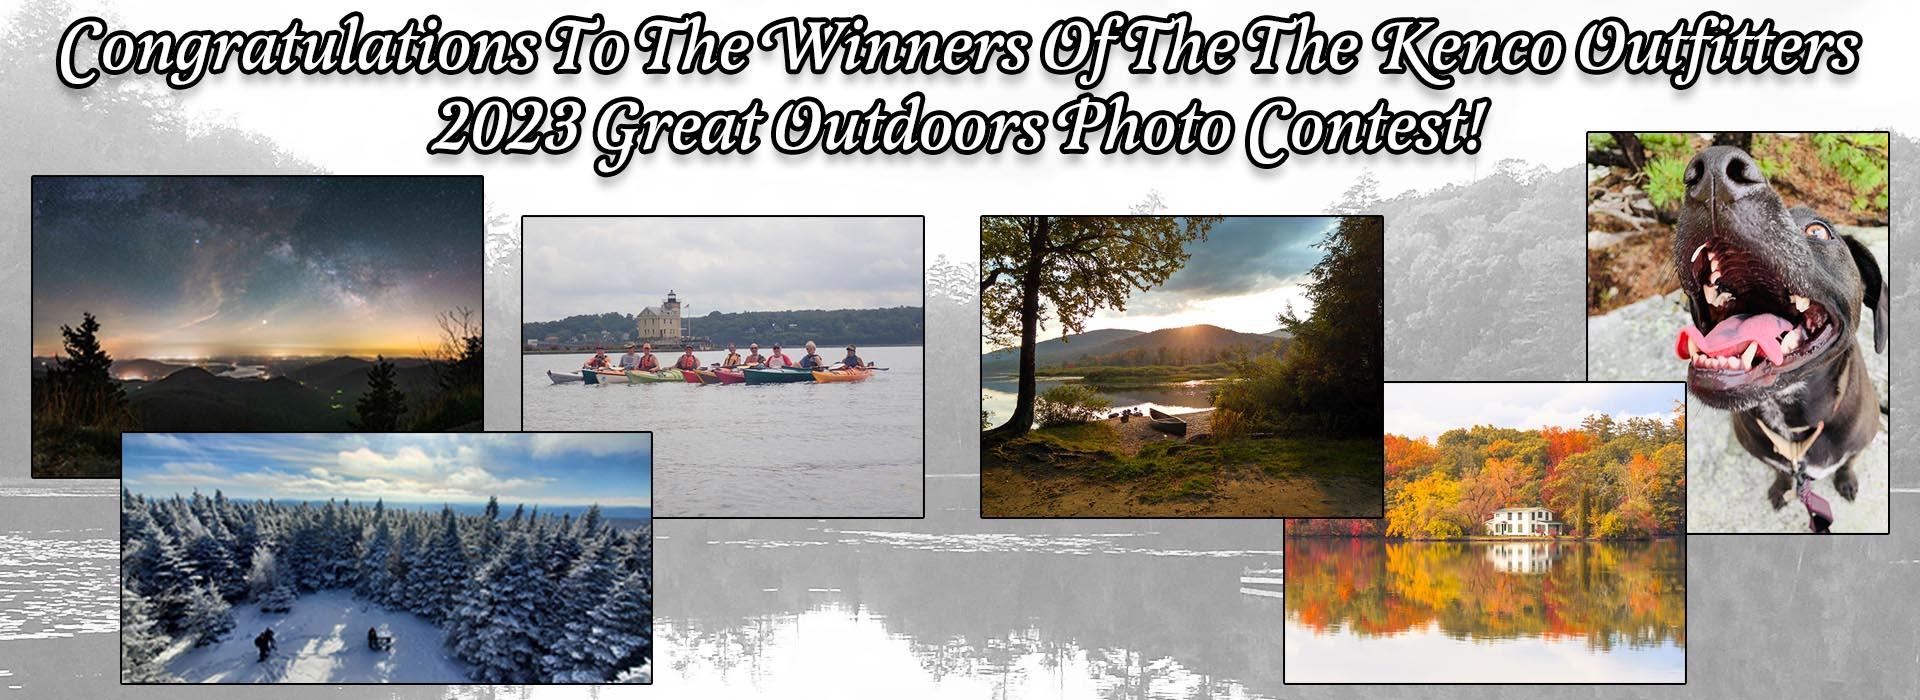 Congratulations To The Winners Of The Kenco Outfitters 2023 Great Outdoors Photo Contest!